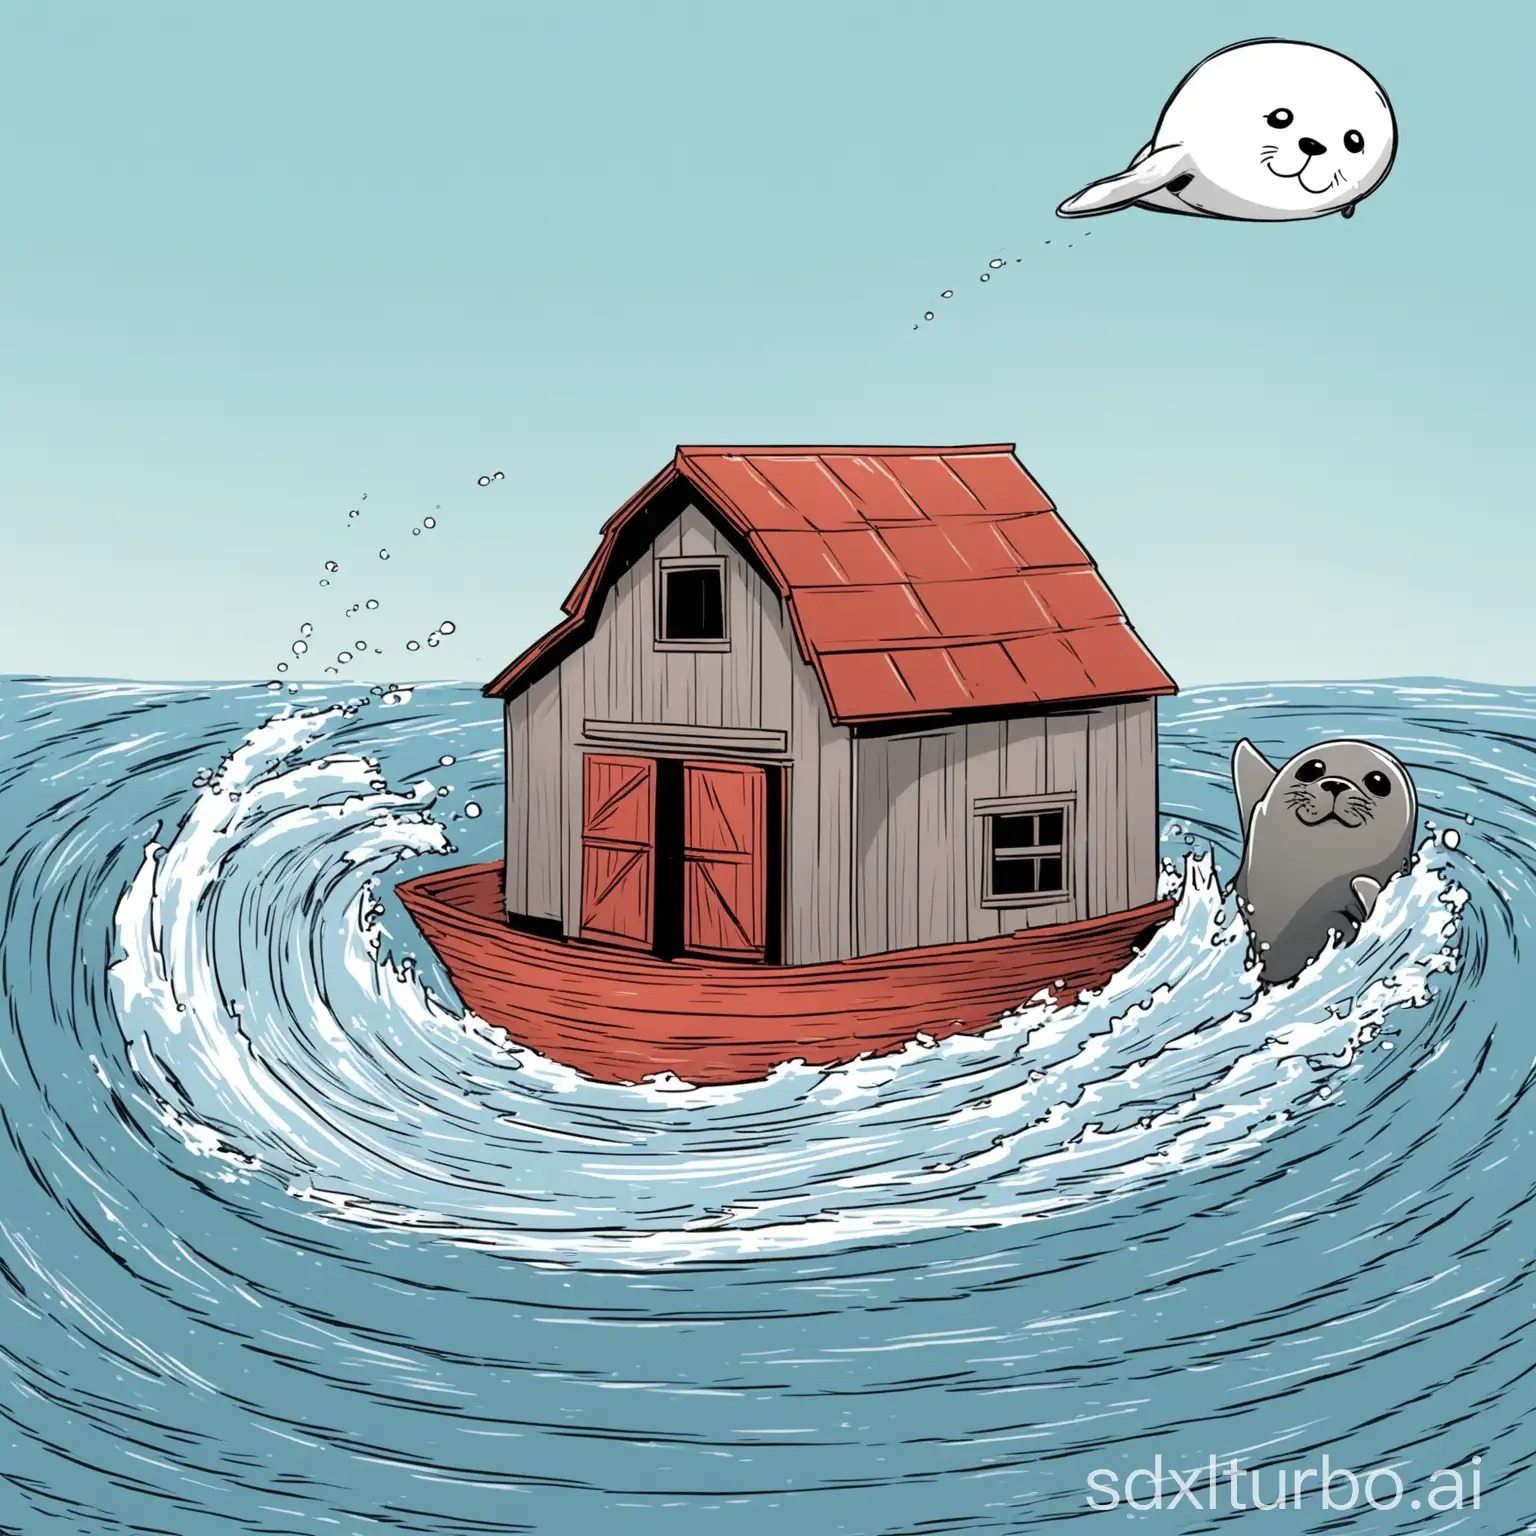 cartoon like, trajectory of a small barn drifting at sea with a seal on its roof